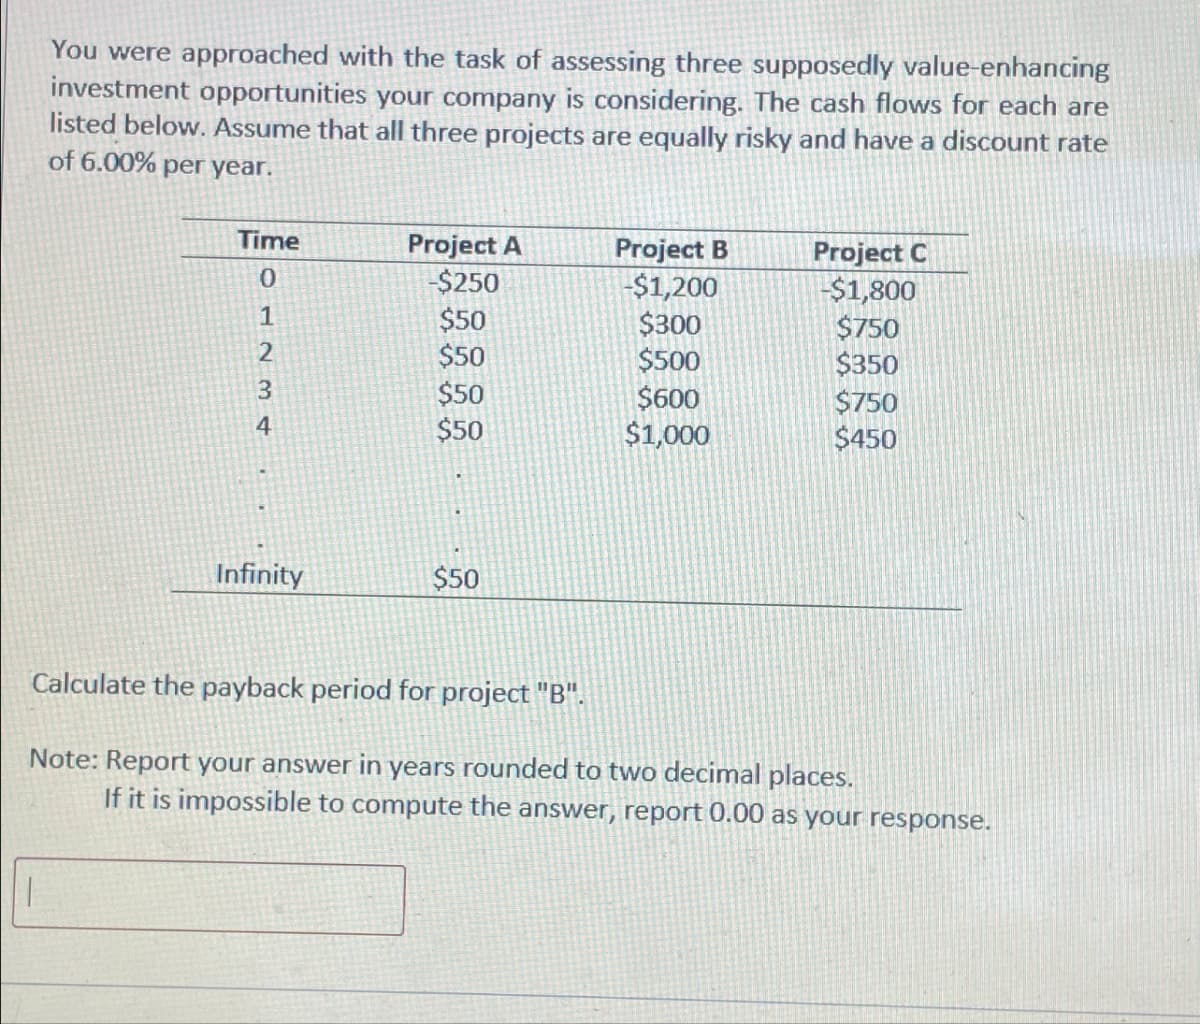 You were approached with the task of assessing three supposedly value-enhancing
investment opportunities your company is considering. The cash flows for each are
listed below. Assume that all three projects are equally risky and have a discount rate
of 6.00% per year.
Time
Project A
Project B
Project C
01234
-$250
-$1,200
-$1,800
$50
$300
$750
$50
$500
$350
$50
$600
$750
$50
$1,000
$450
Infinity
$50
Calculate the payback period for project "B".
Note: Report your answer in years rounded to two decimal places.
If it is impossible to compute the answer, report 0.00 as your response.